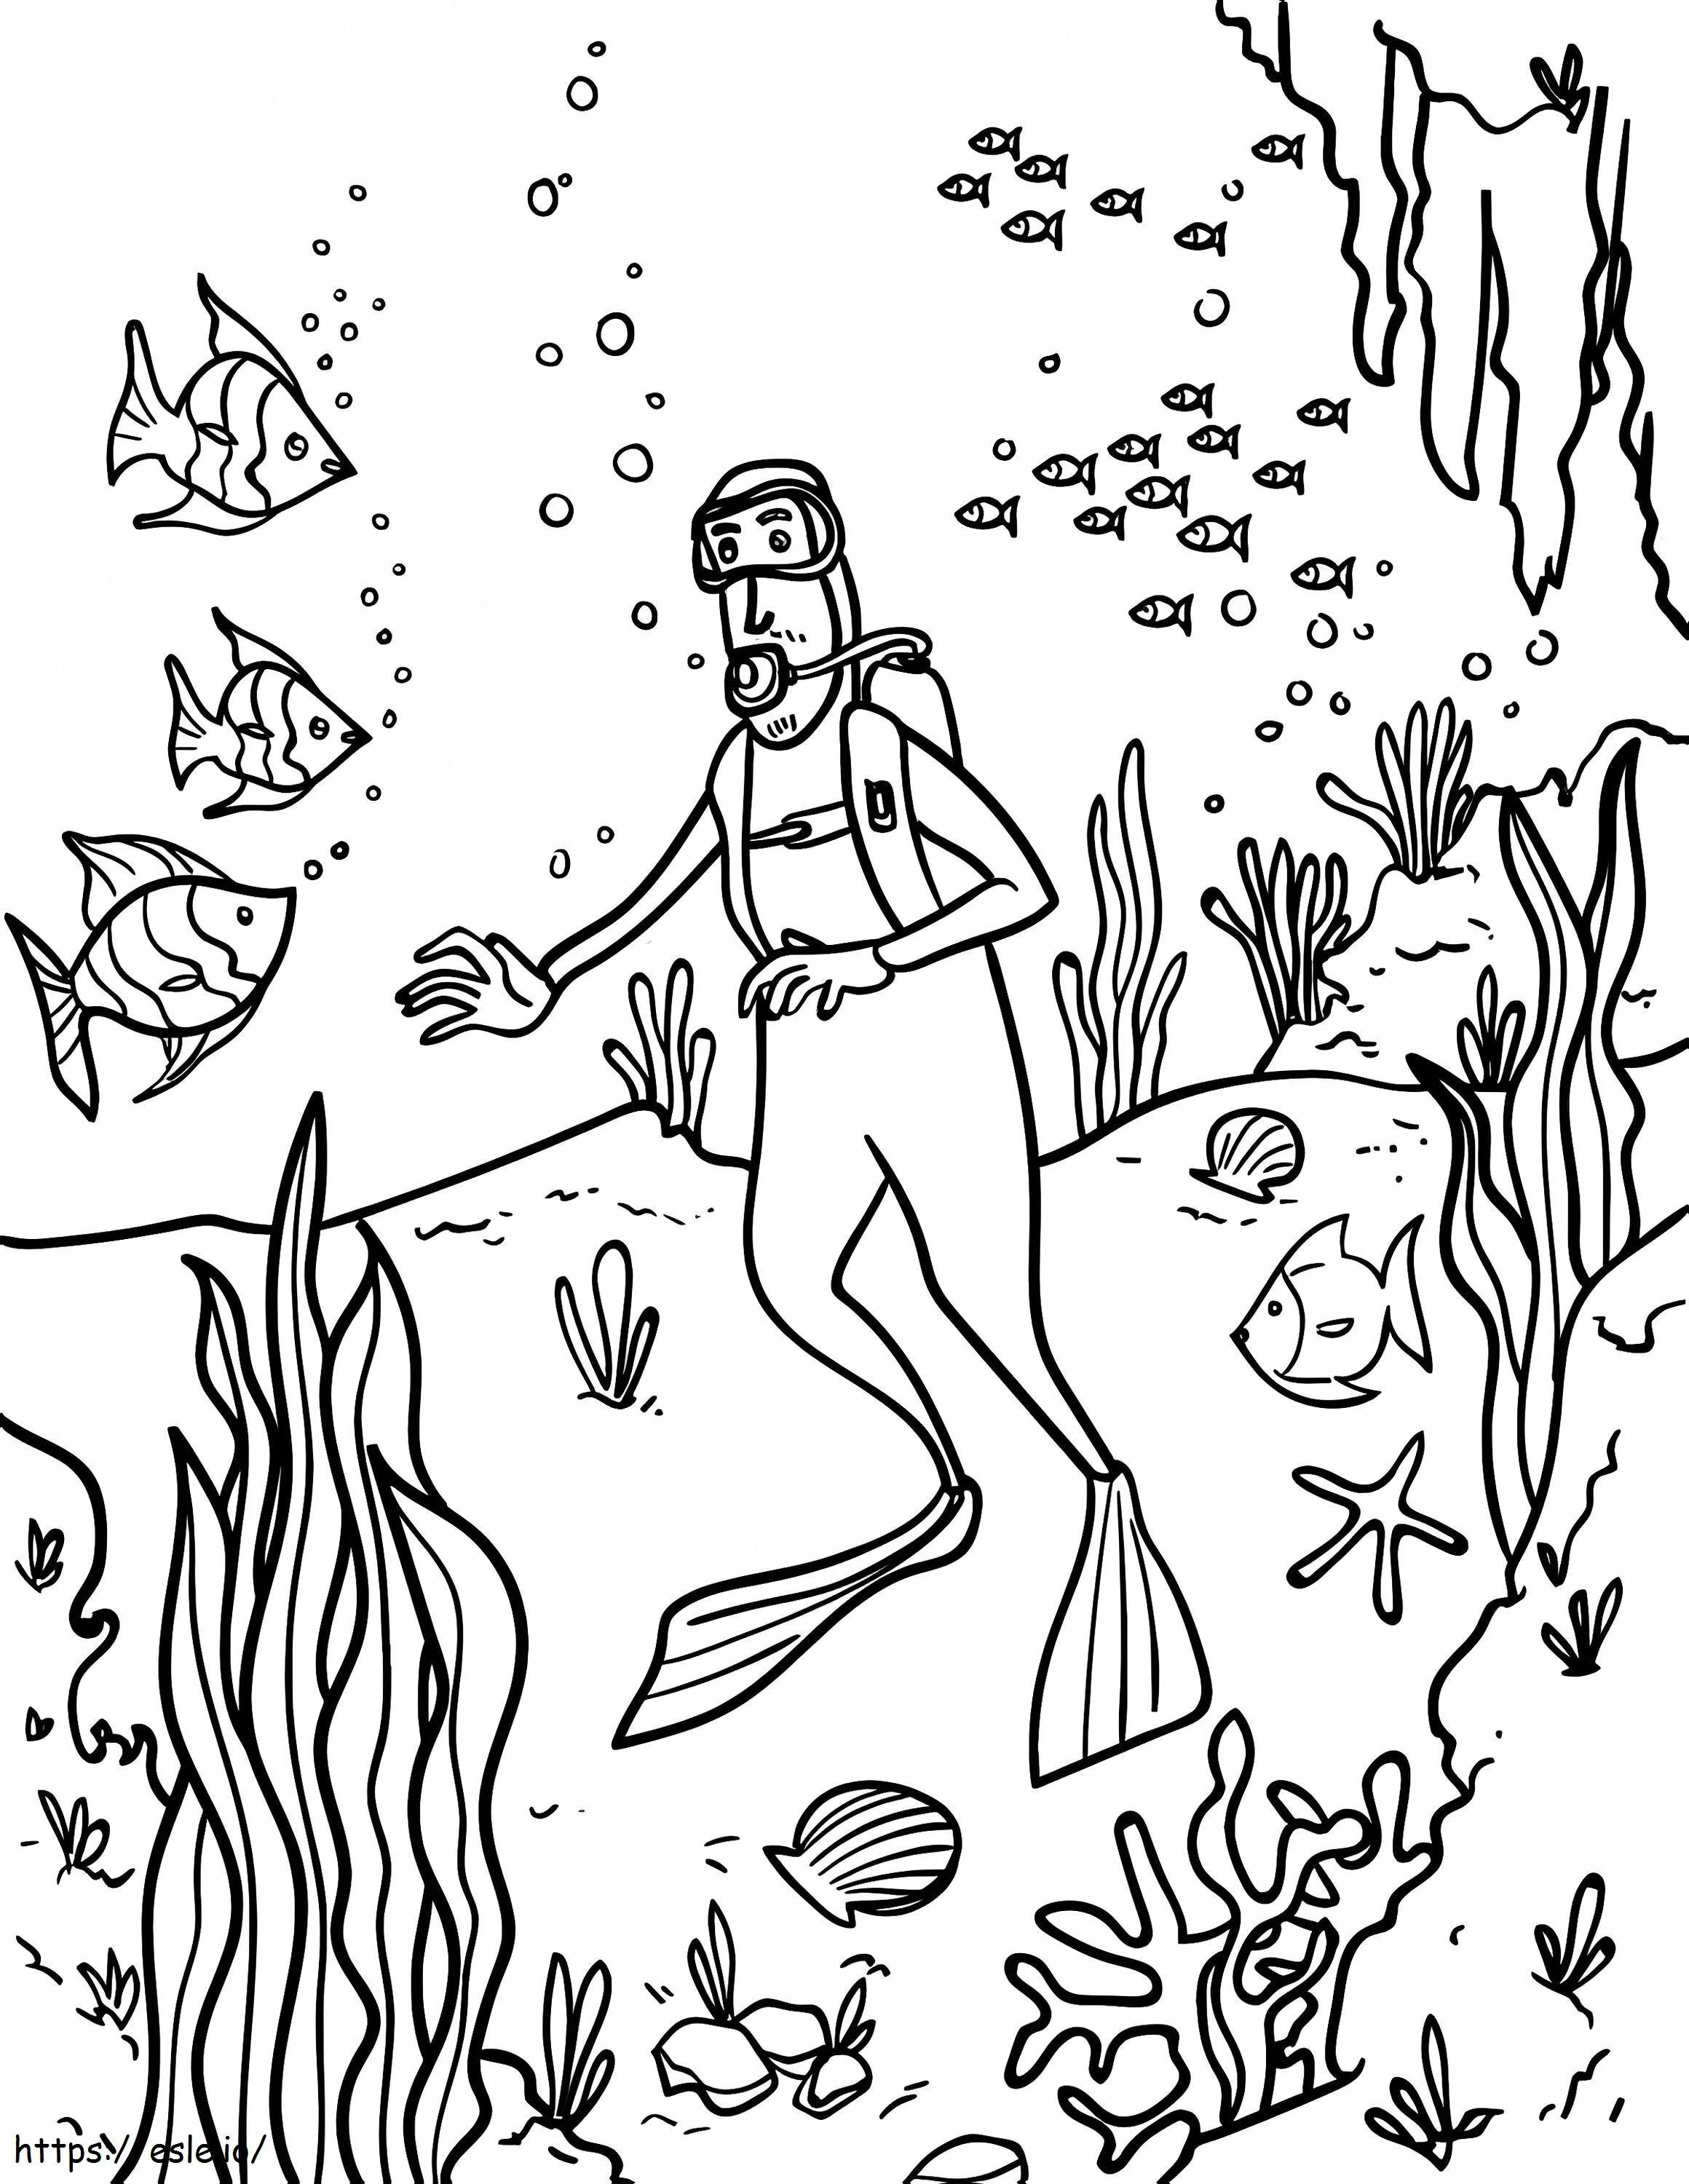 Scuba Diver And Fishes coloring page